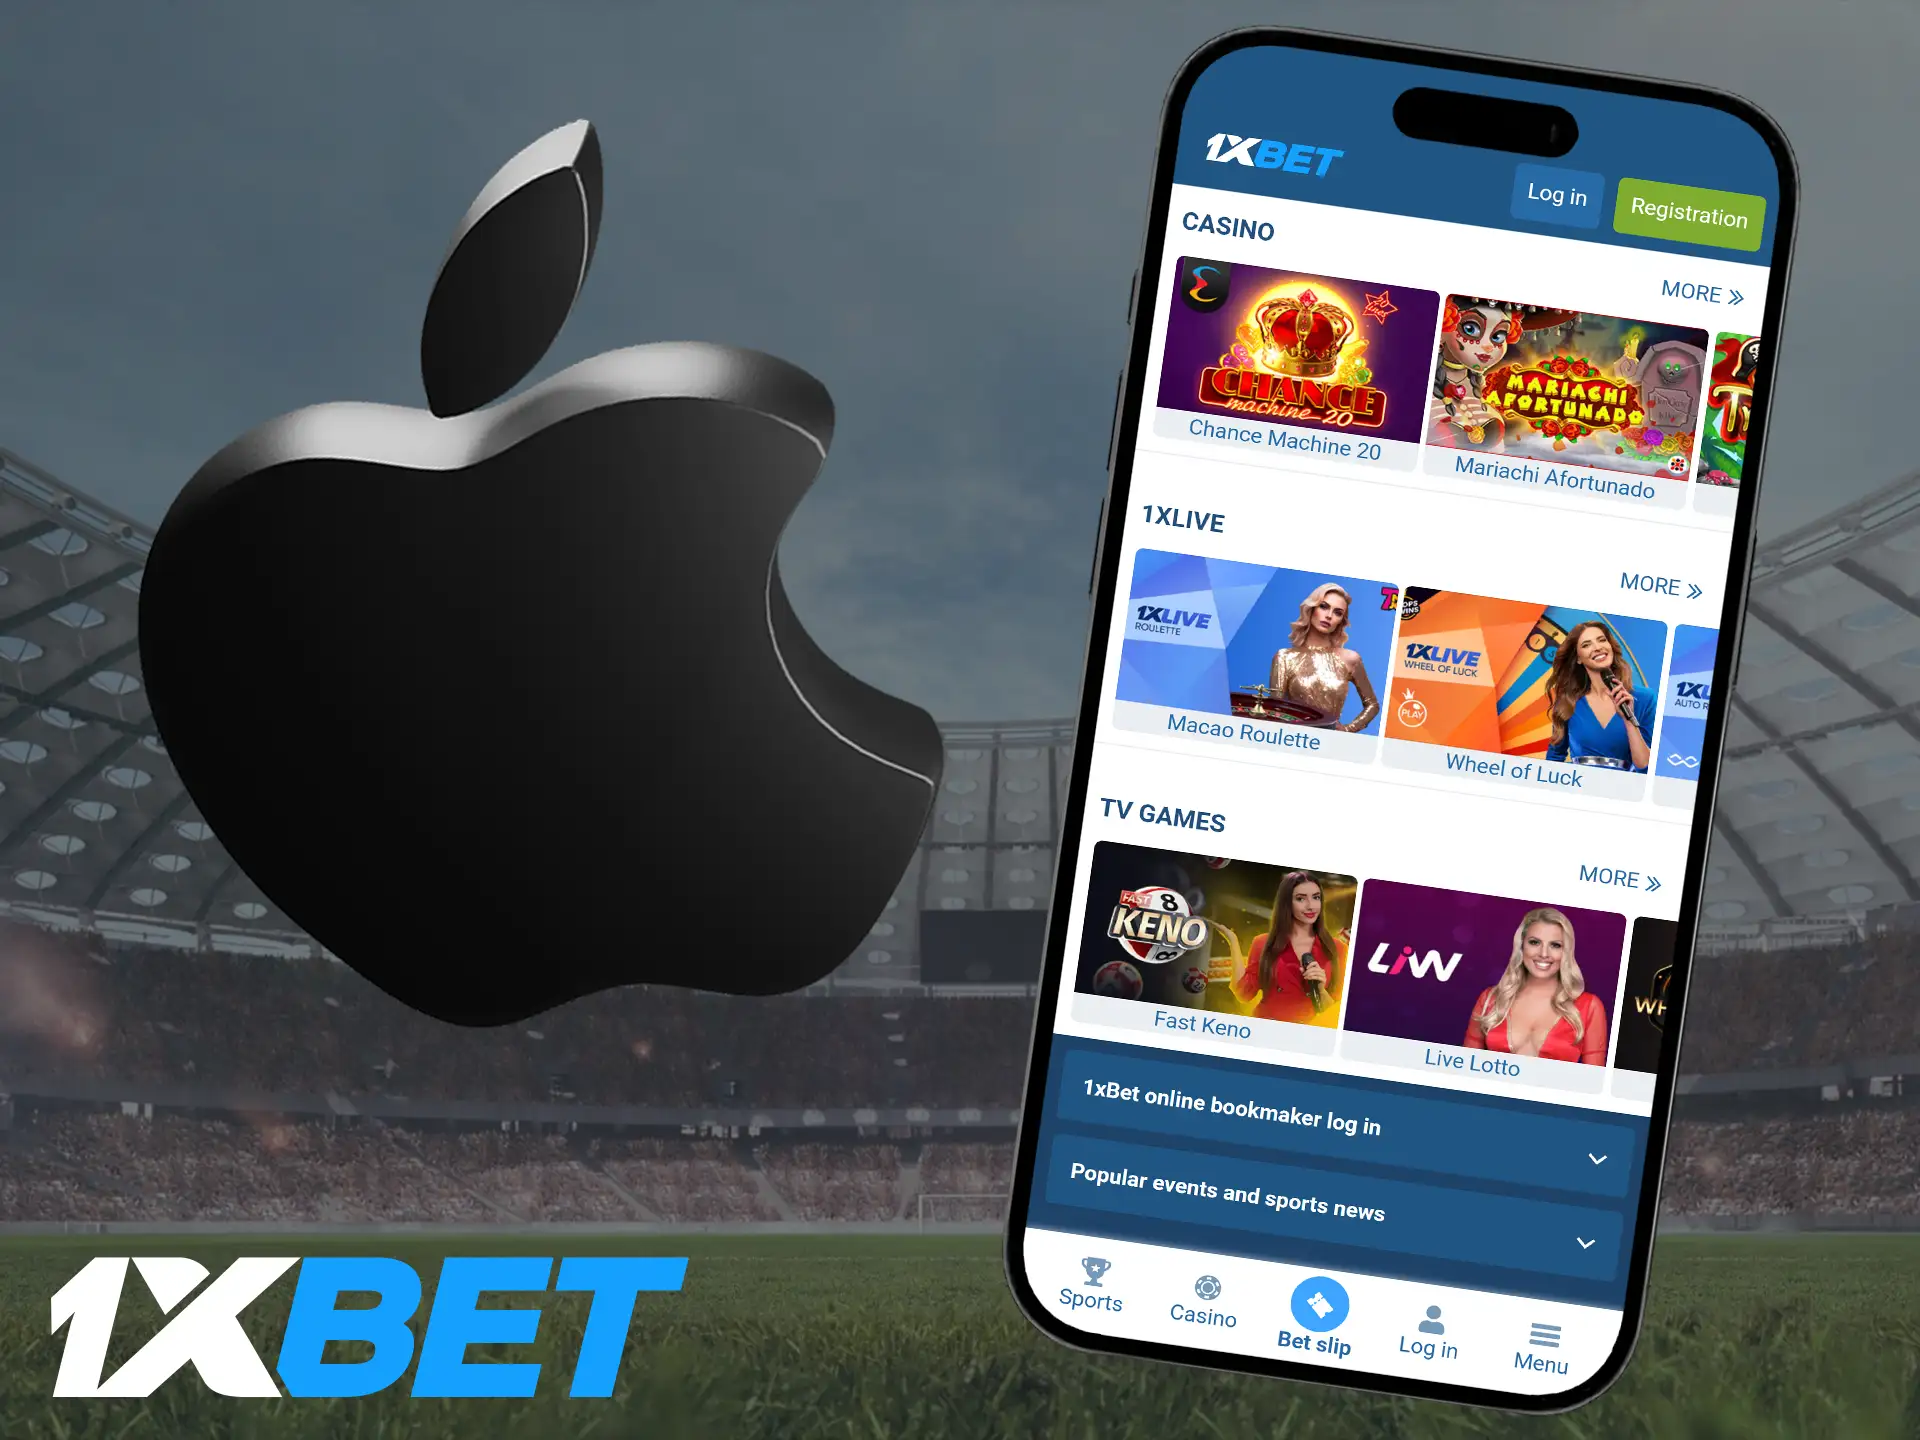 For iOS device users, 1xBet has created a special mobile application that is fully optimized for mobile devices.